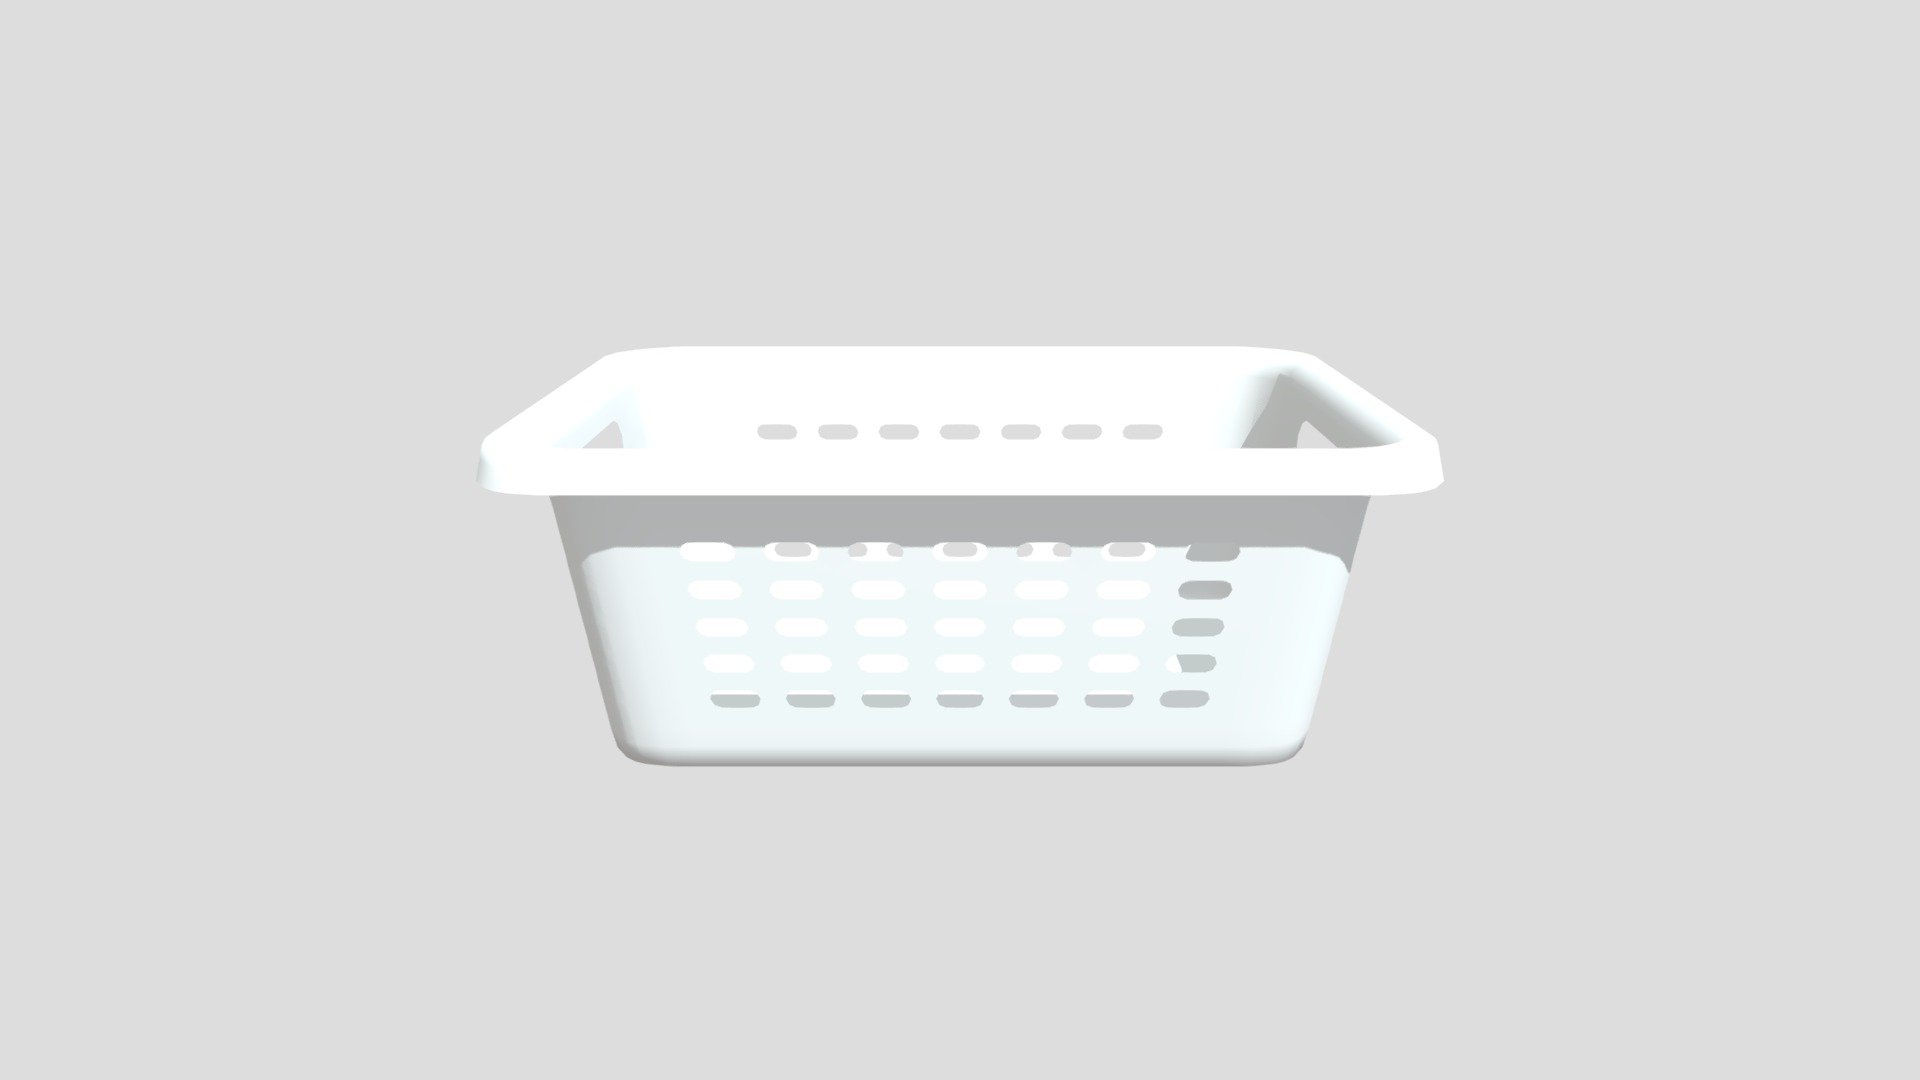 A basic laundry basket.
You can add a solidify and subsurf modifer in blender to create higher detail 3d model